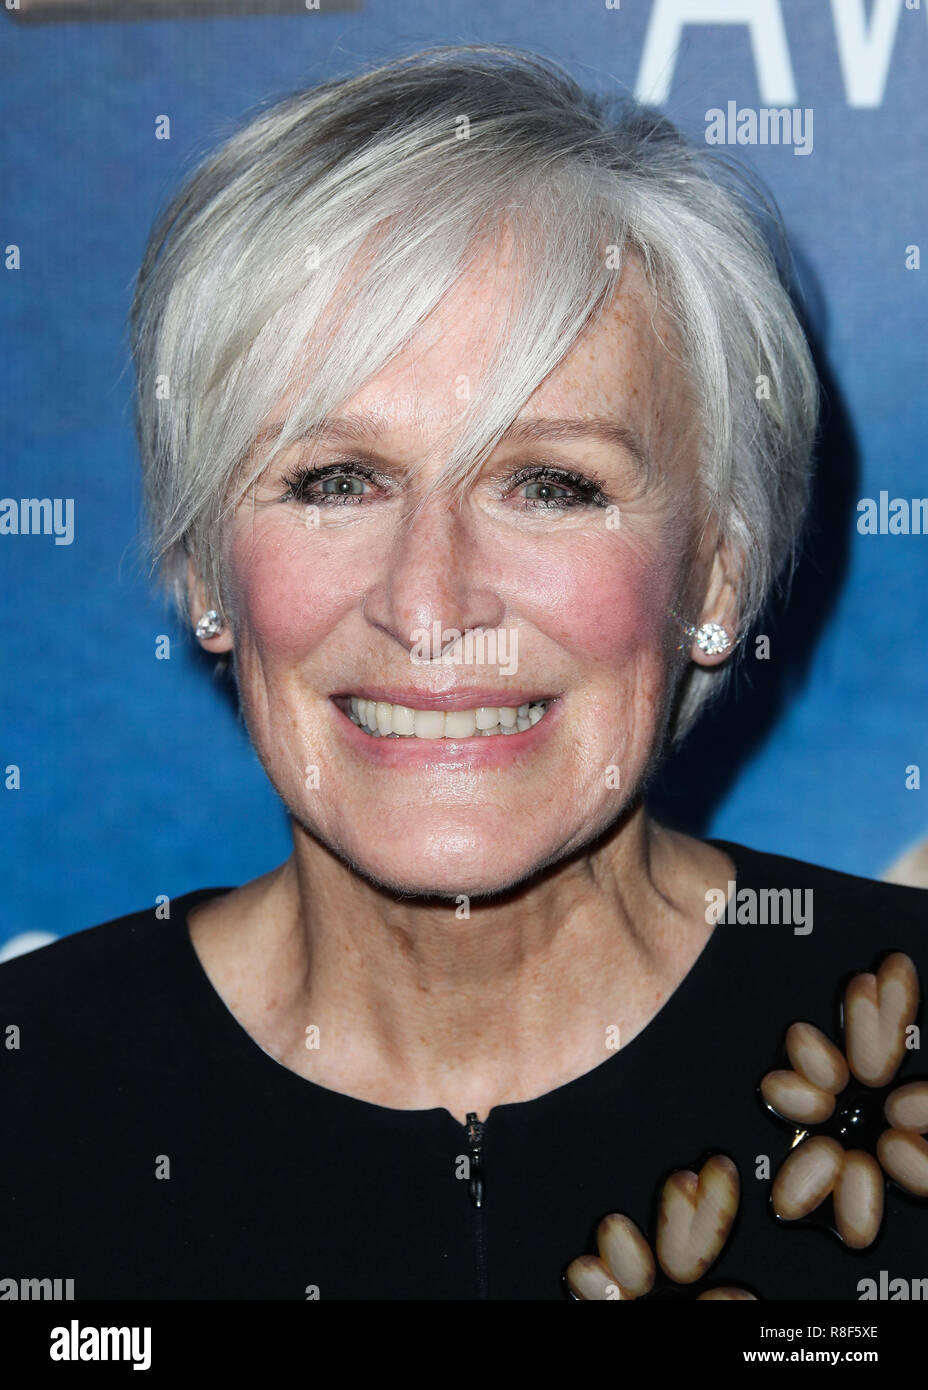 BEVERLY HILLS, LOS ANGELES, CA, USA - FEBRUARY 11: Glenn Close at the 2018 Writers Guild Awards Los Angeles Ceremony held at The Beverly Hilton Hotel on February 11, 2018 in Beverly Hills, Los Angeles, California, United States. (Photo by Xavier Collin/Image Press Agency) Stock Photo